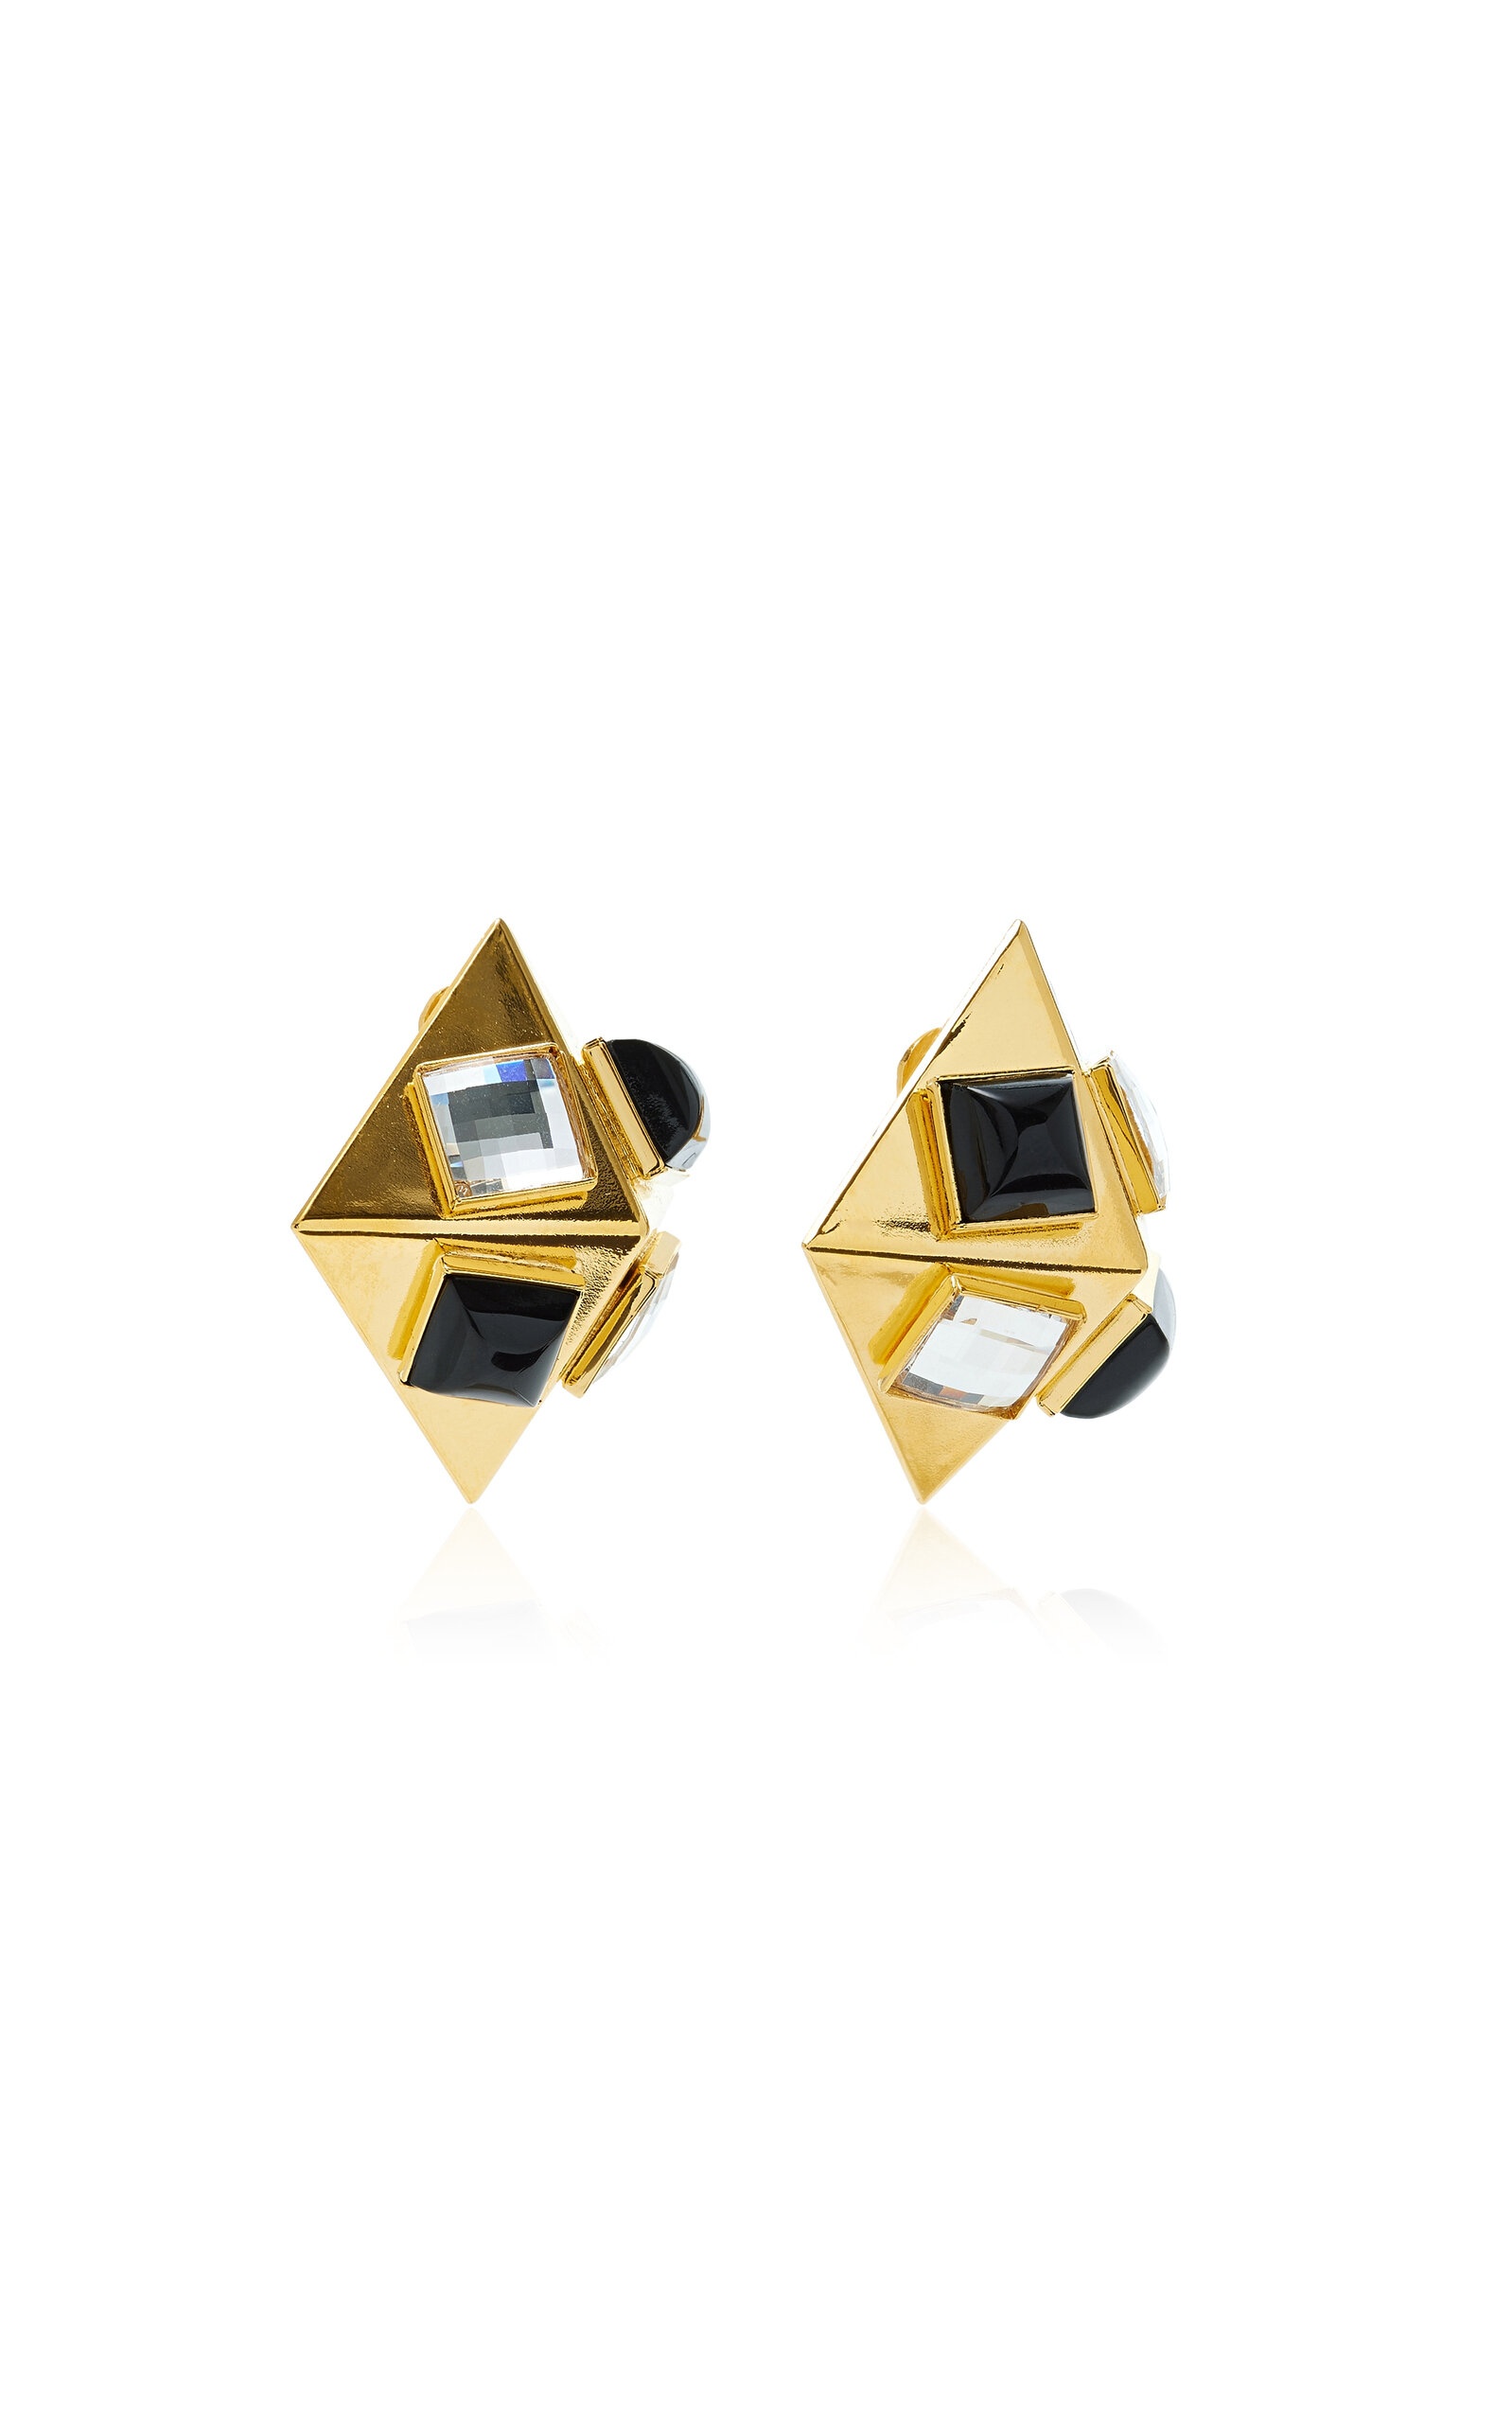 Crystal Gold-Tone Pyramid Earrings gold - 3